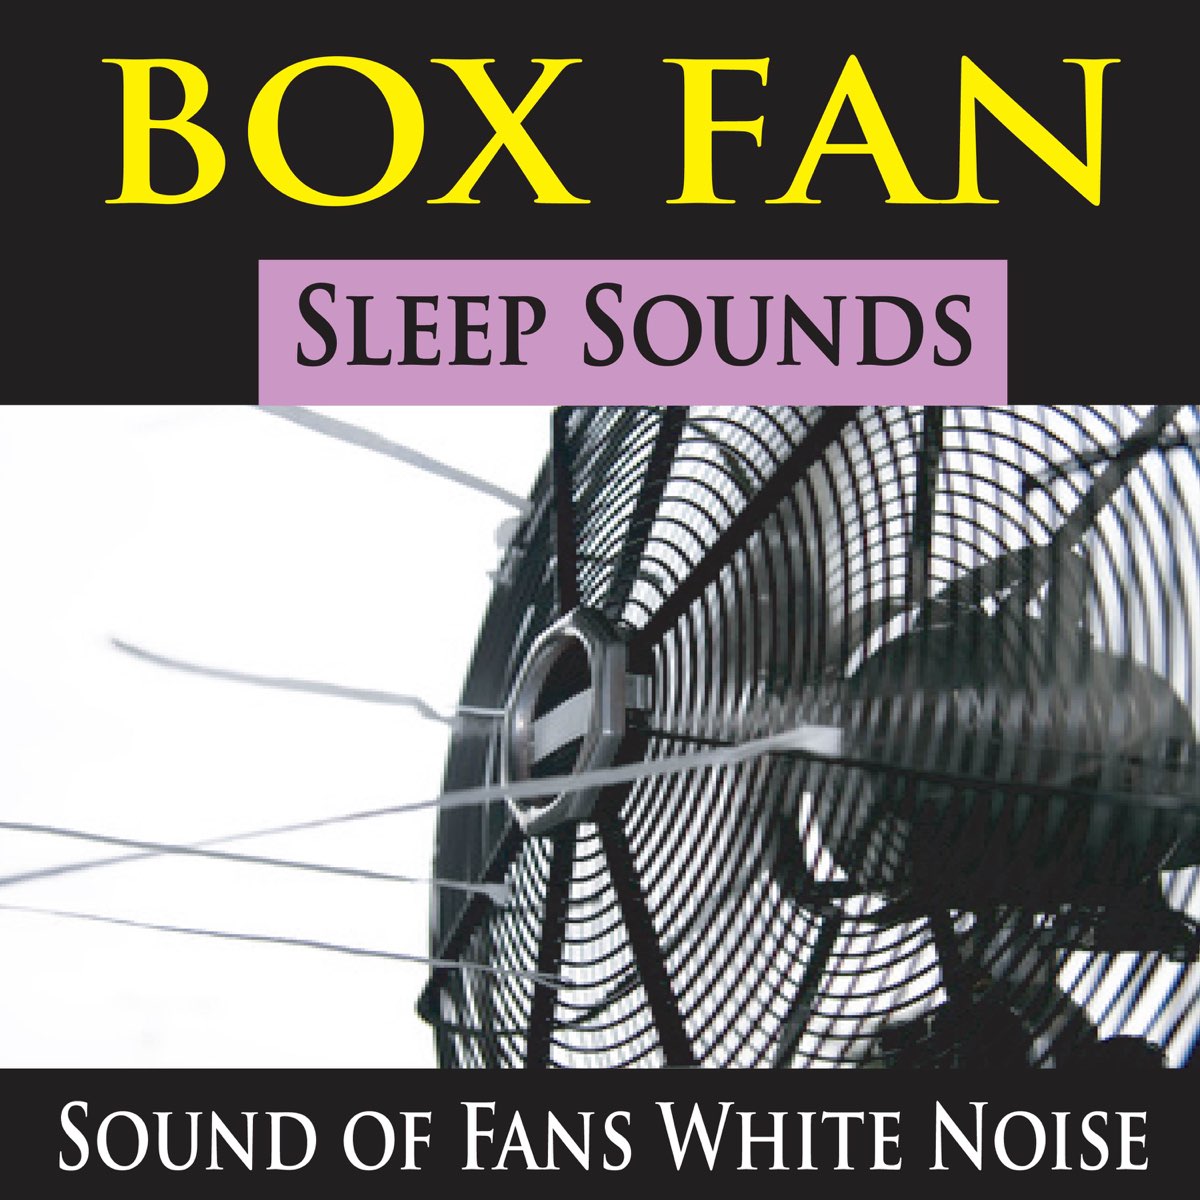 Real Fan Inside for Non-Looping White Noise Sounds App-Based Remote Control  Renewed Sleep Timer and Night Light Charcoal SNOOZ White Noise Sound  Machine Sleep Sound Machines Baby sostulsa.com